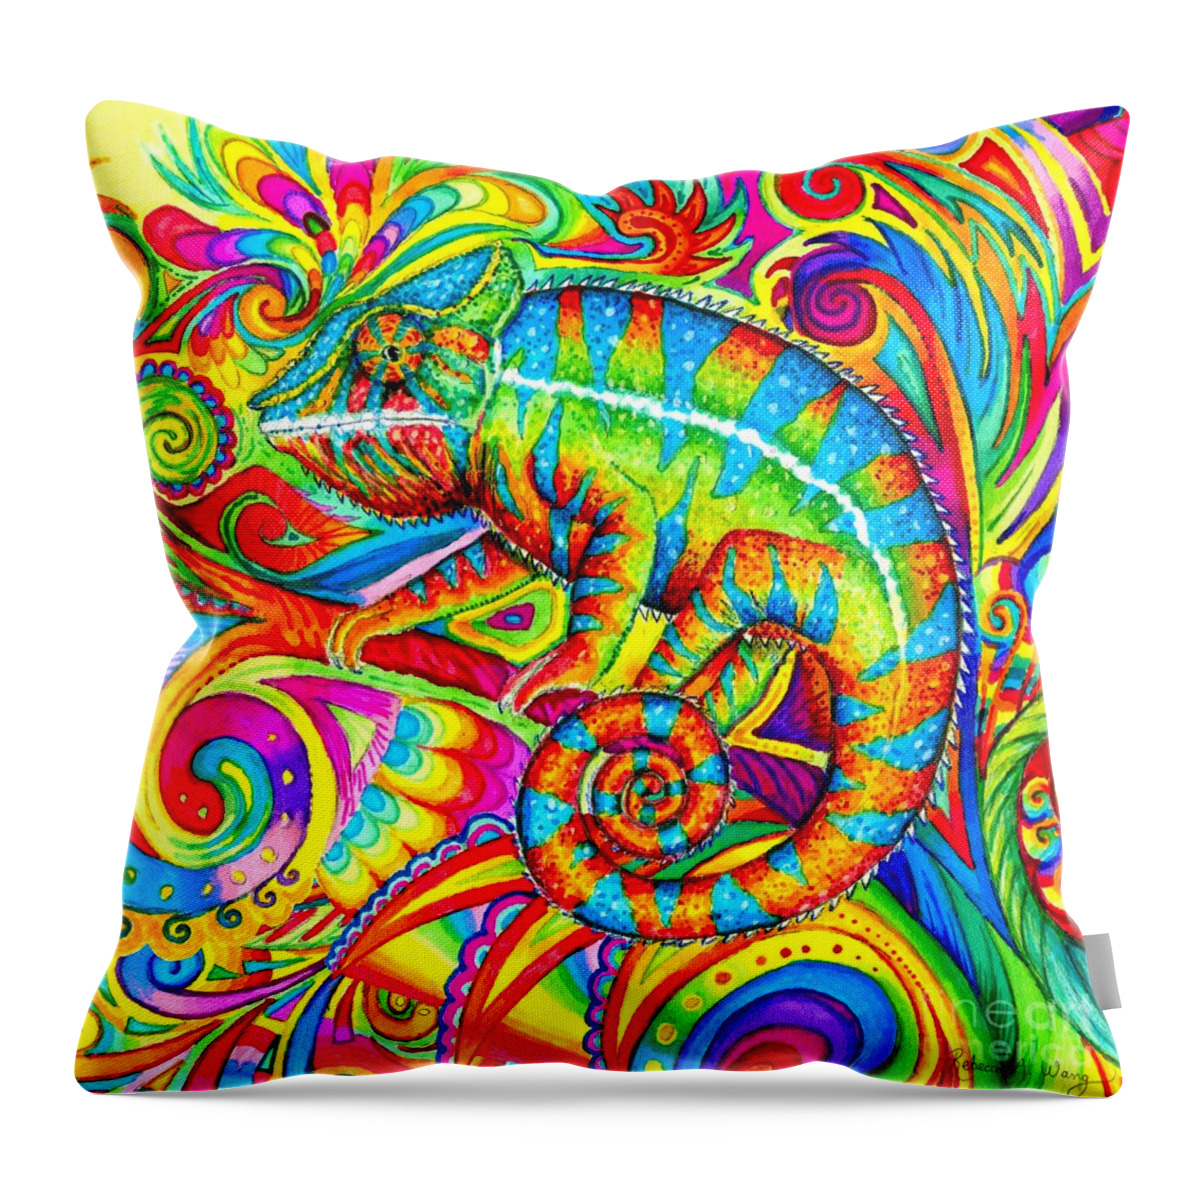 Chameleon Throw Pillow featuring the drawing Psychedelizard - Psychedelic Rainbow Chameleon by Rebecca Wang